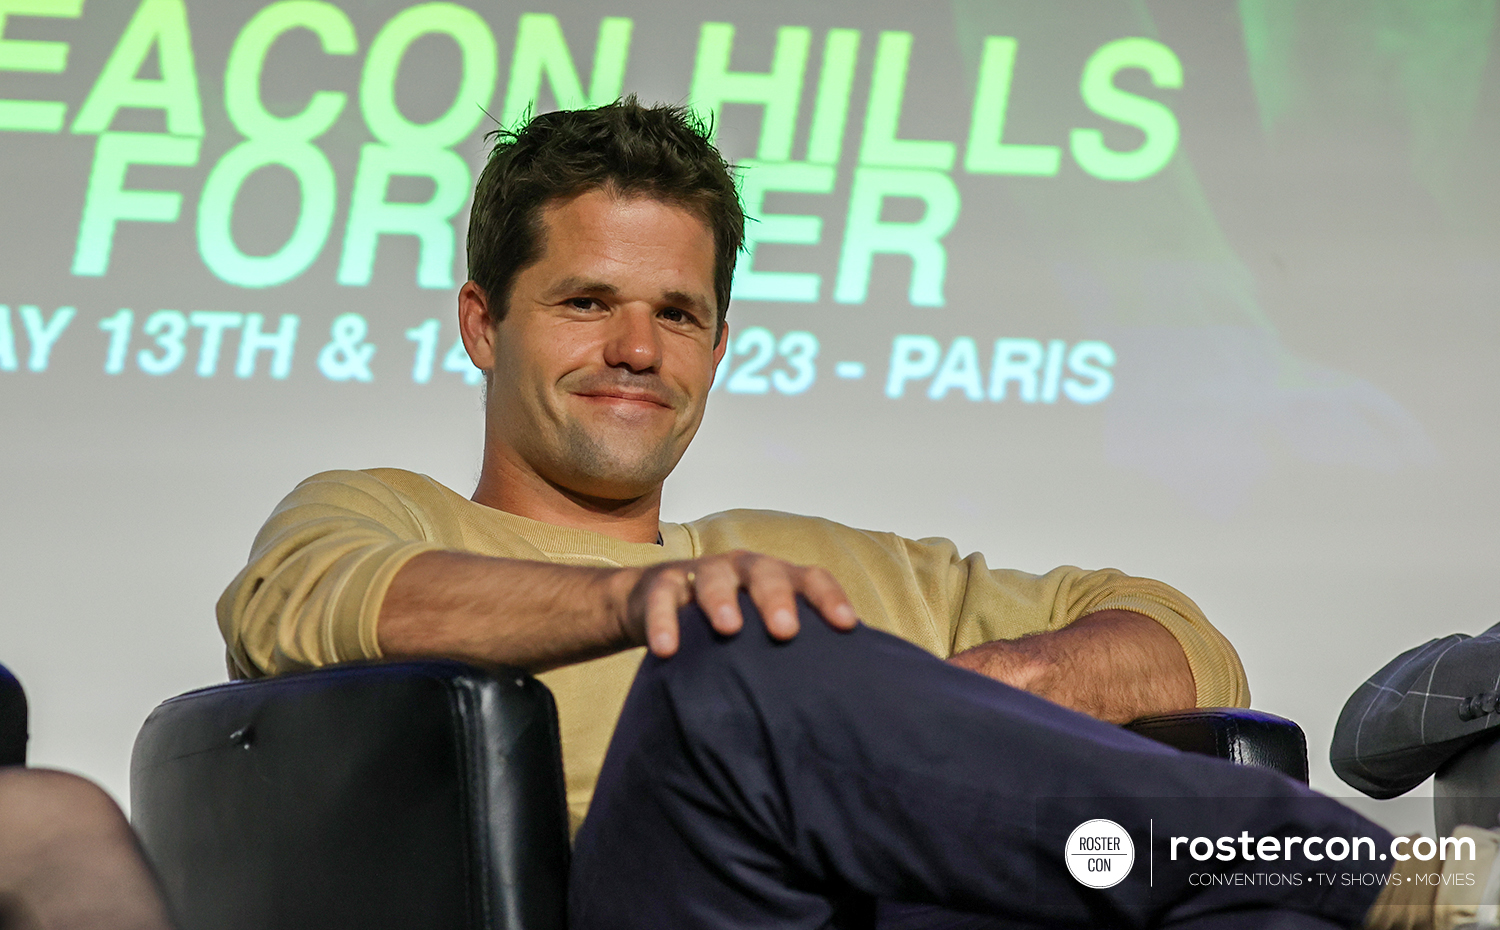 Max Carver - Beacon Hills Forever - Teen Wolf